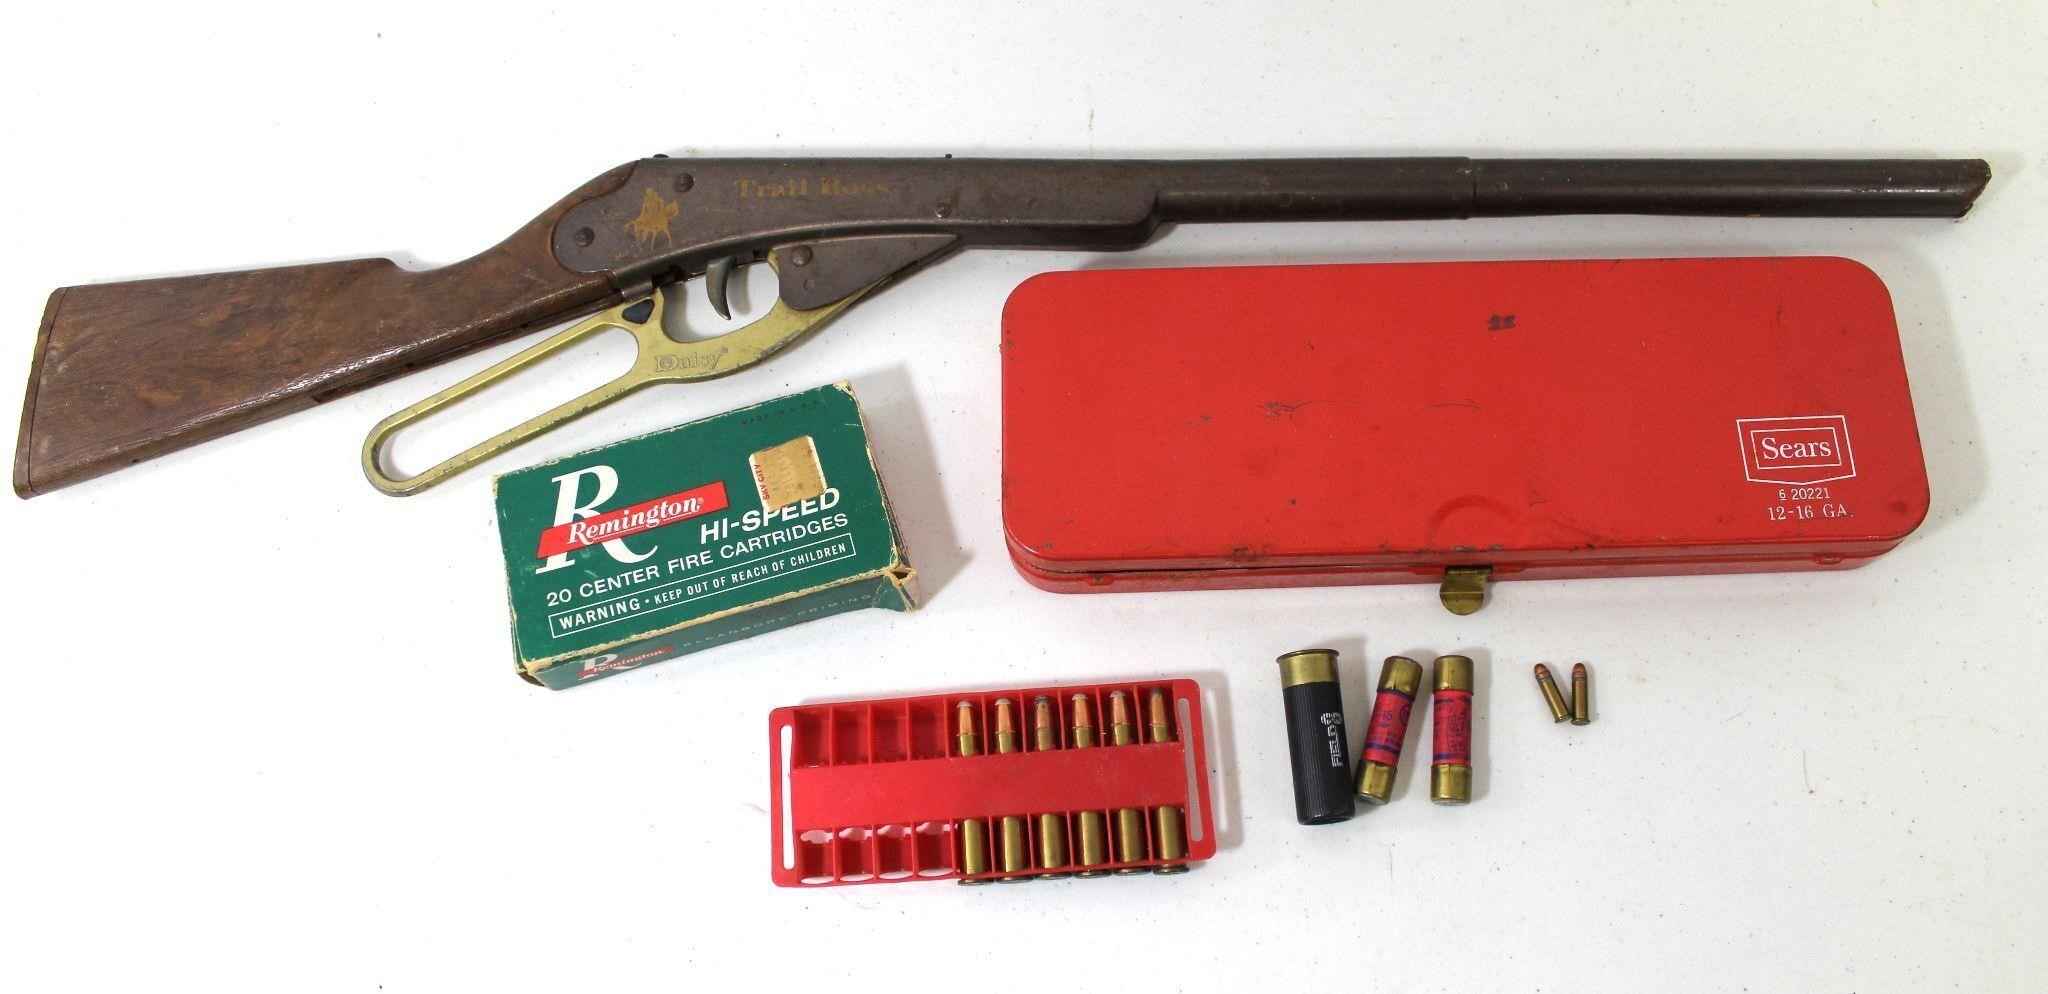 Trail Boss "Daisy" Toy, Sears Cleaning Kit, Ammo